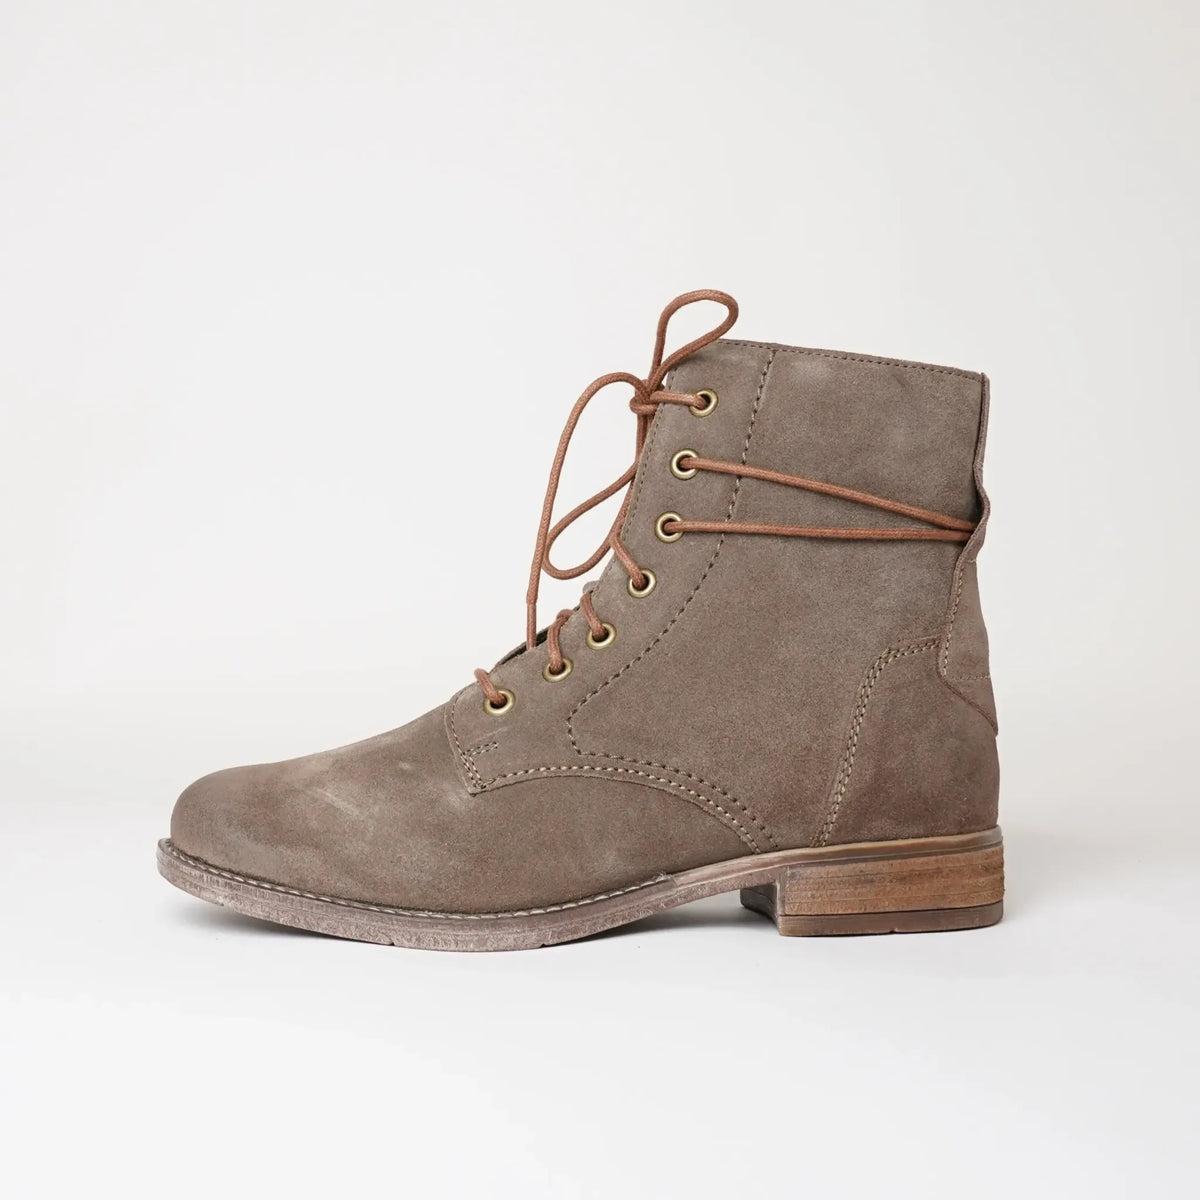 Sienna 70 Taupe Suede Ankle Boots